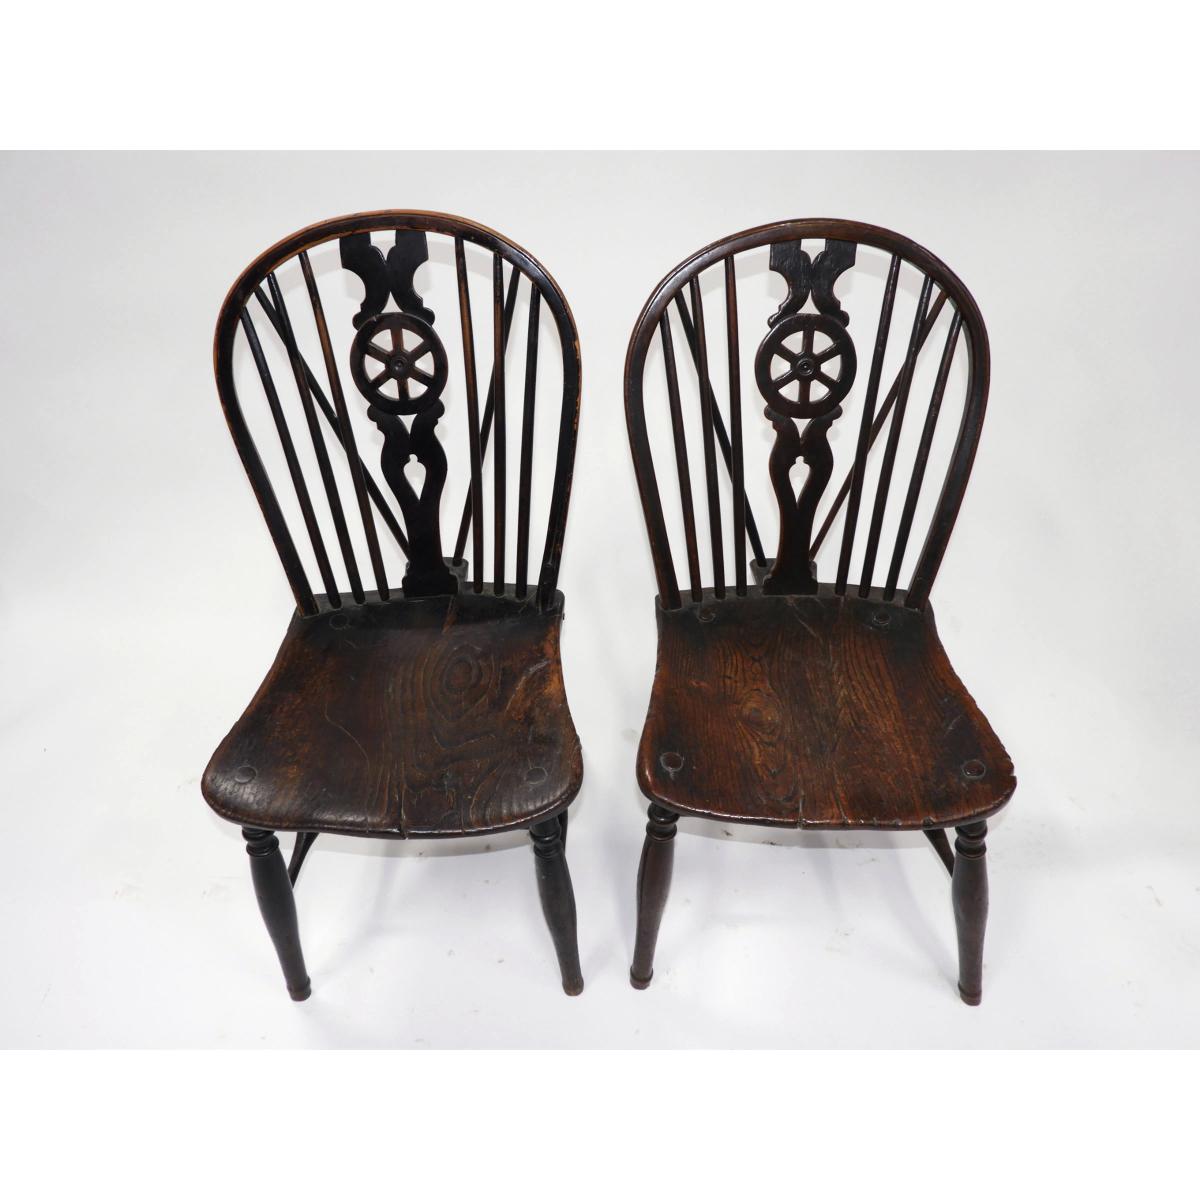 Pair of English Wheel Back Side Chairs, c.1820, height 34.5 in — 87.6 cm (2 Pieces) - Image 2 of 2